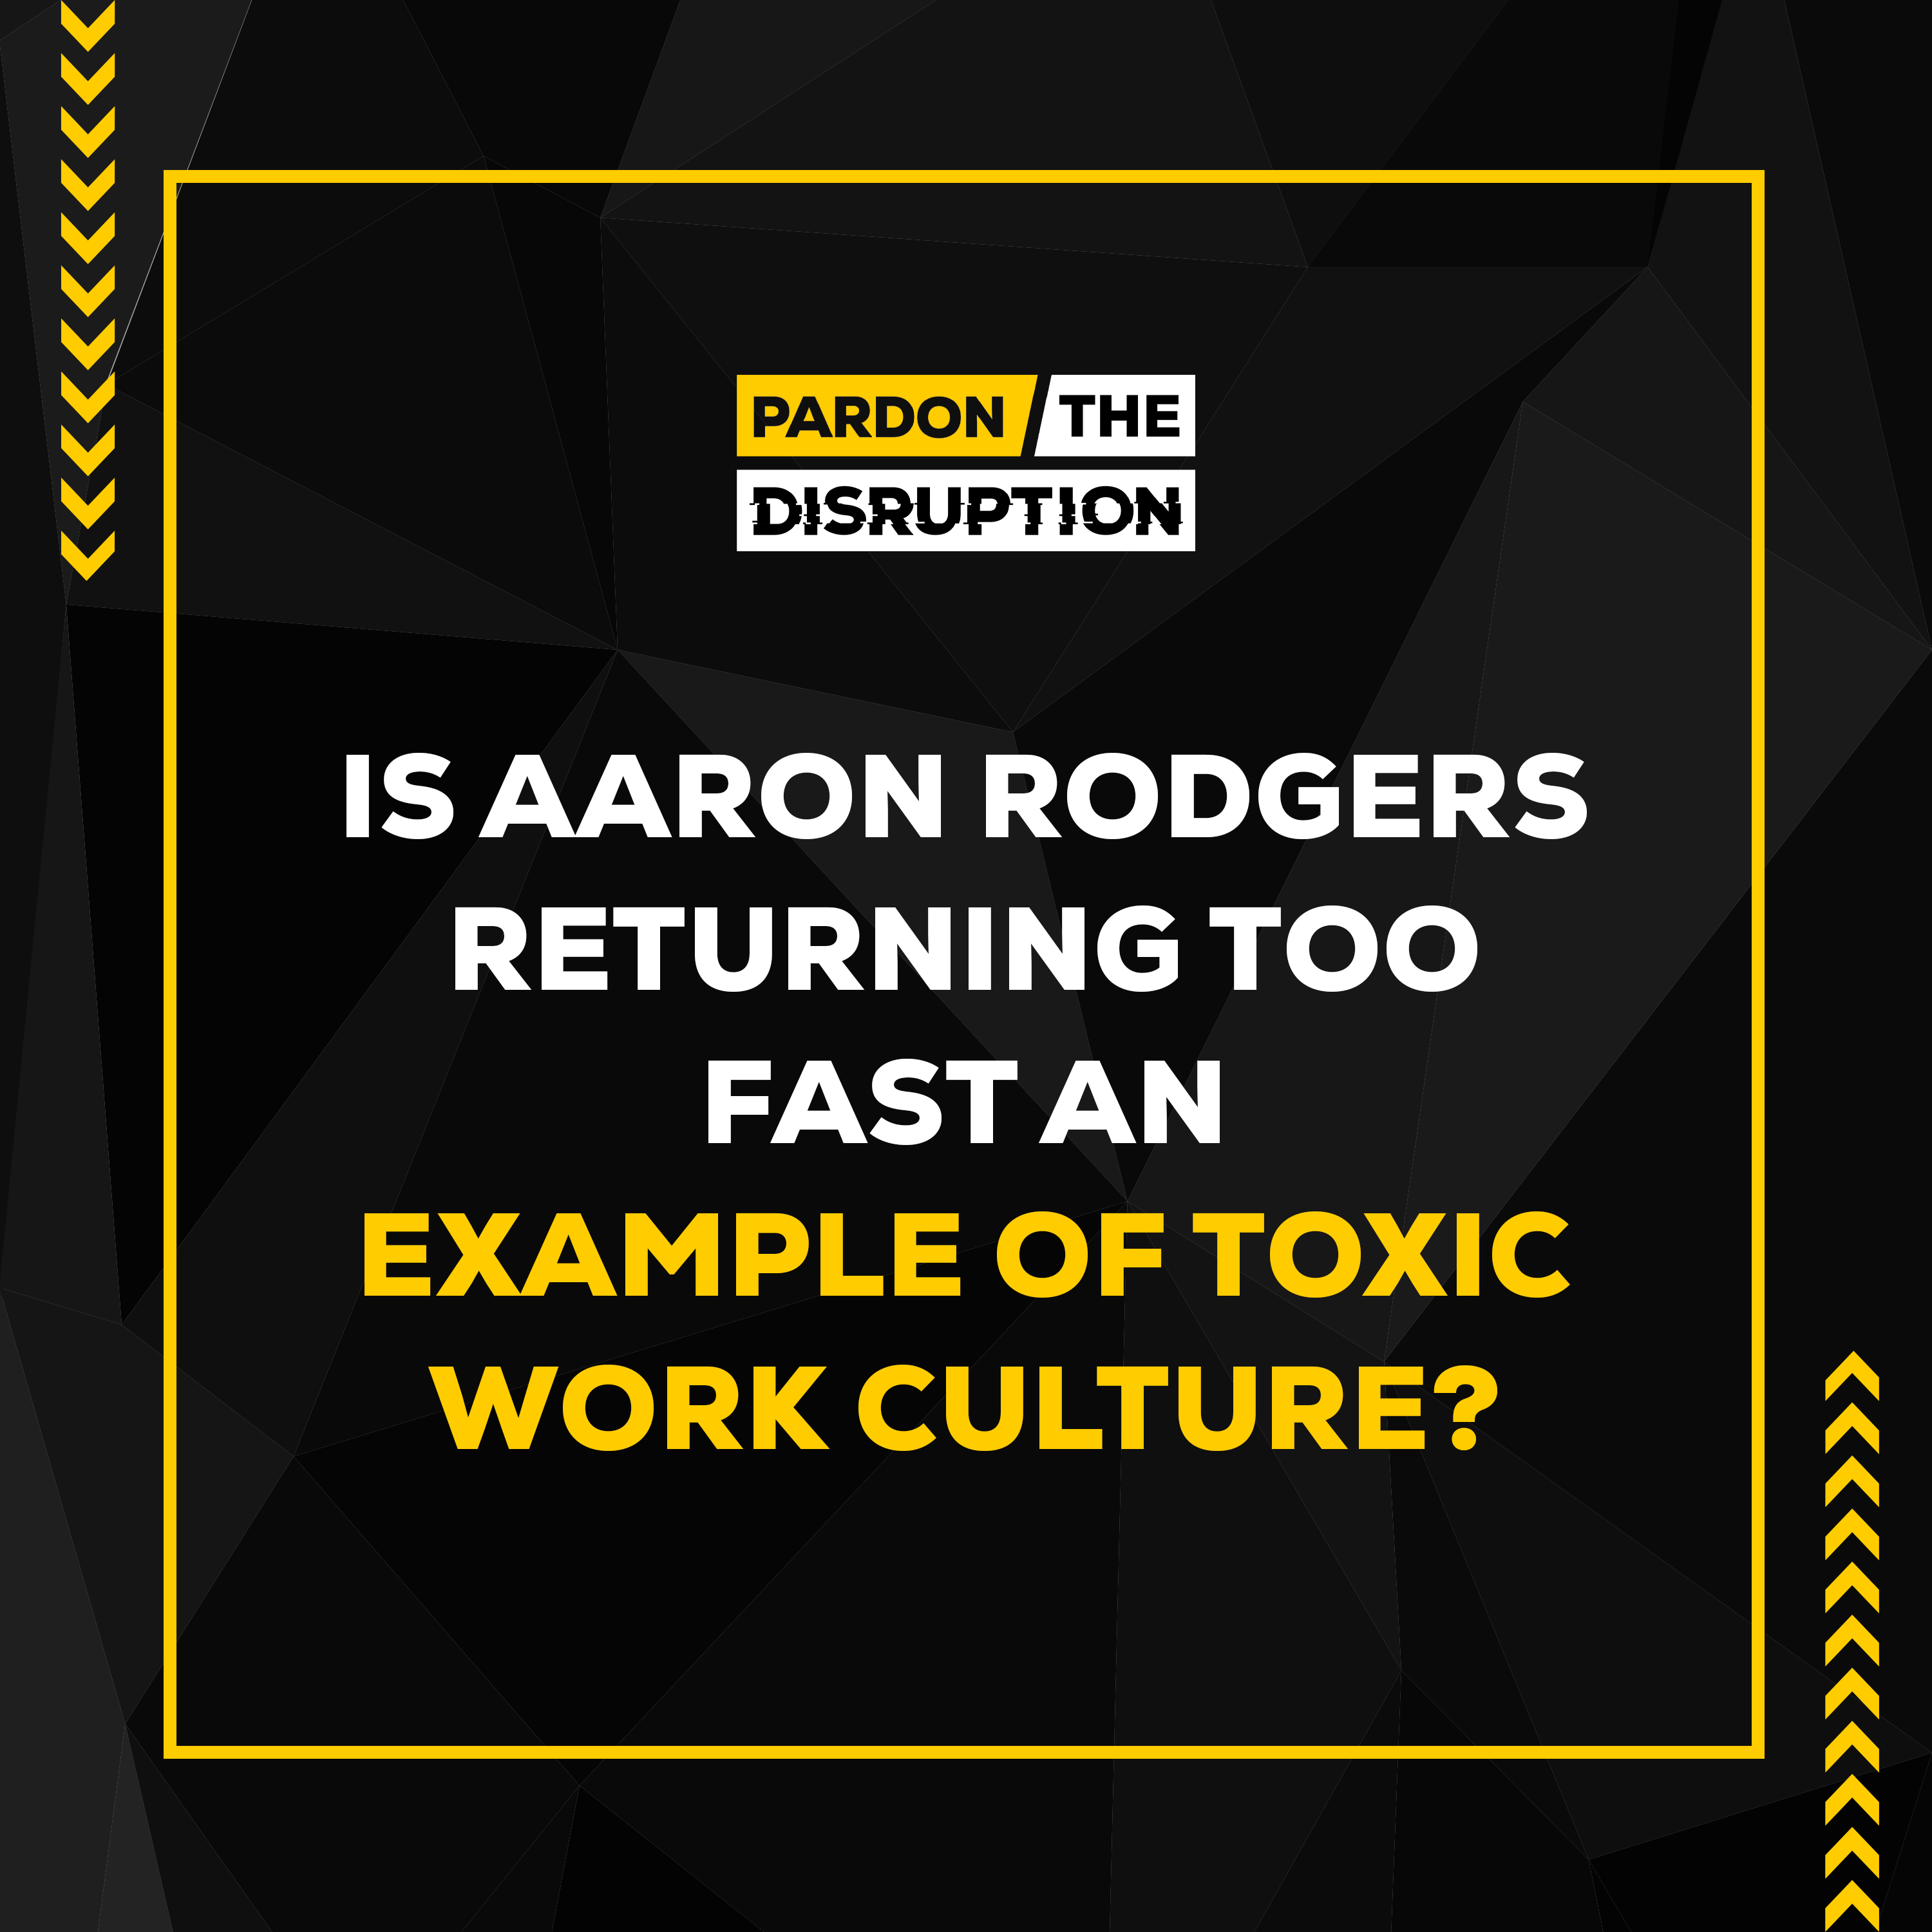 Is Aaron Rodgers Returning too Fast an Example of Toxic Work Culture?